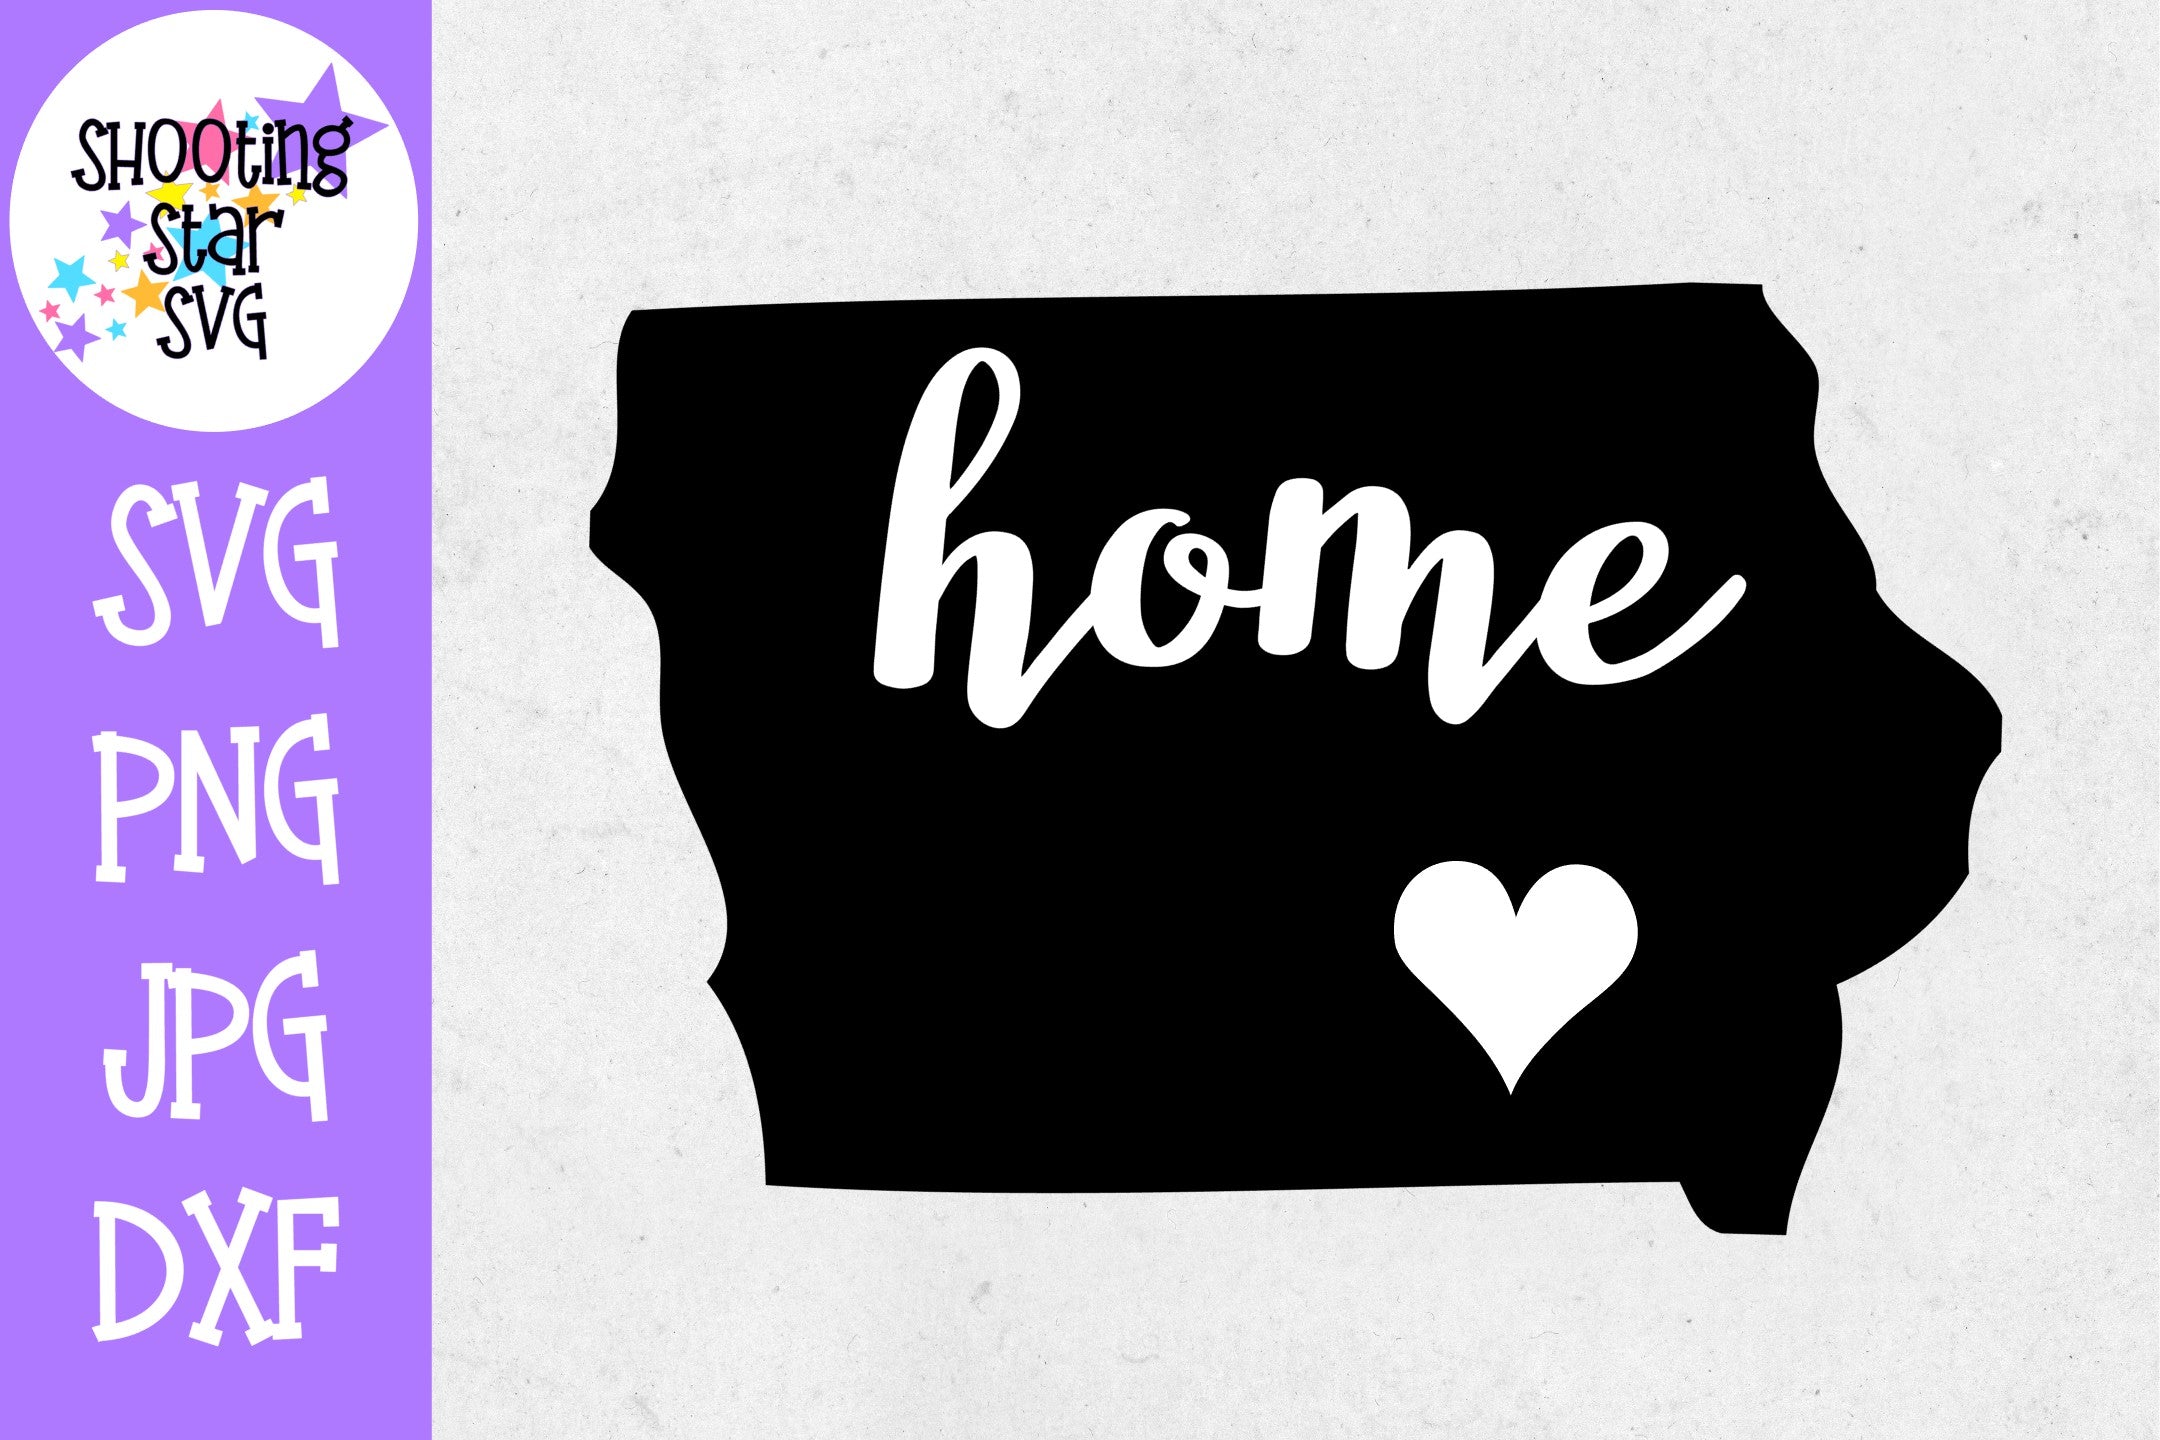 Iowa State Home with Heart SVG - 50 States SVG - United States SVG